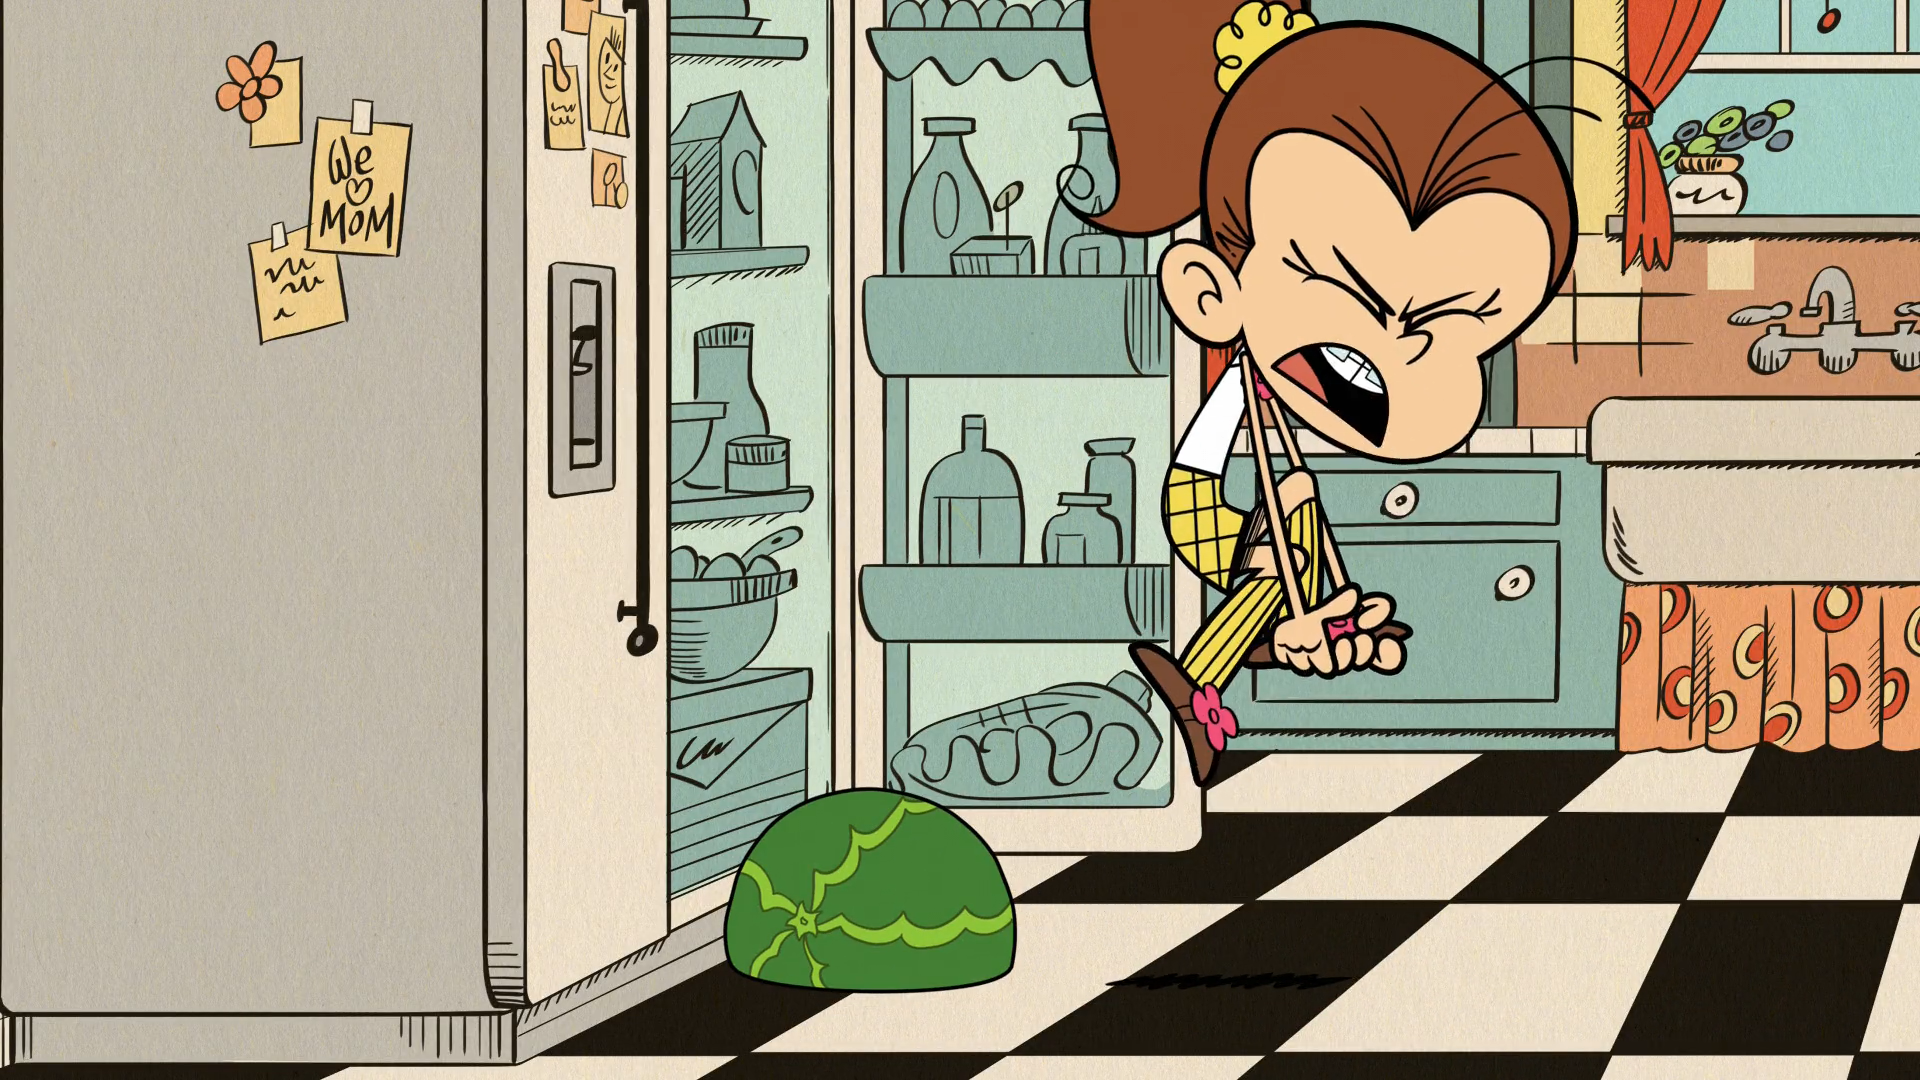 A scene from the Loud House 